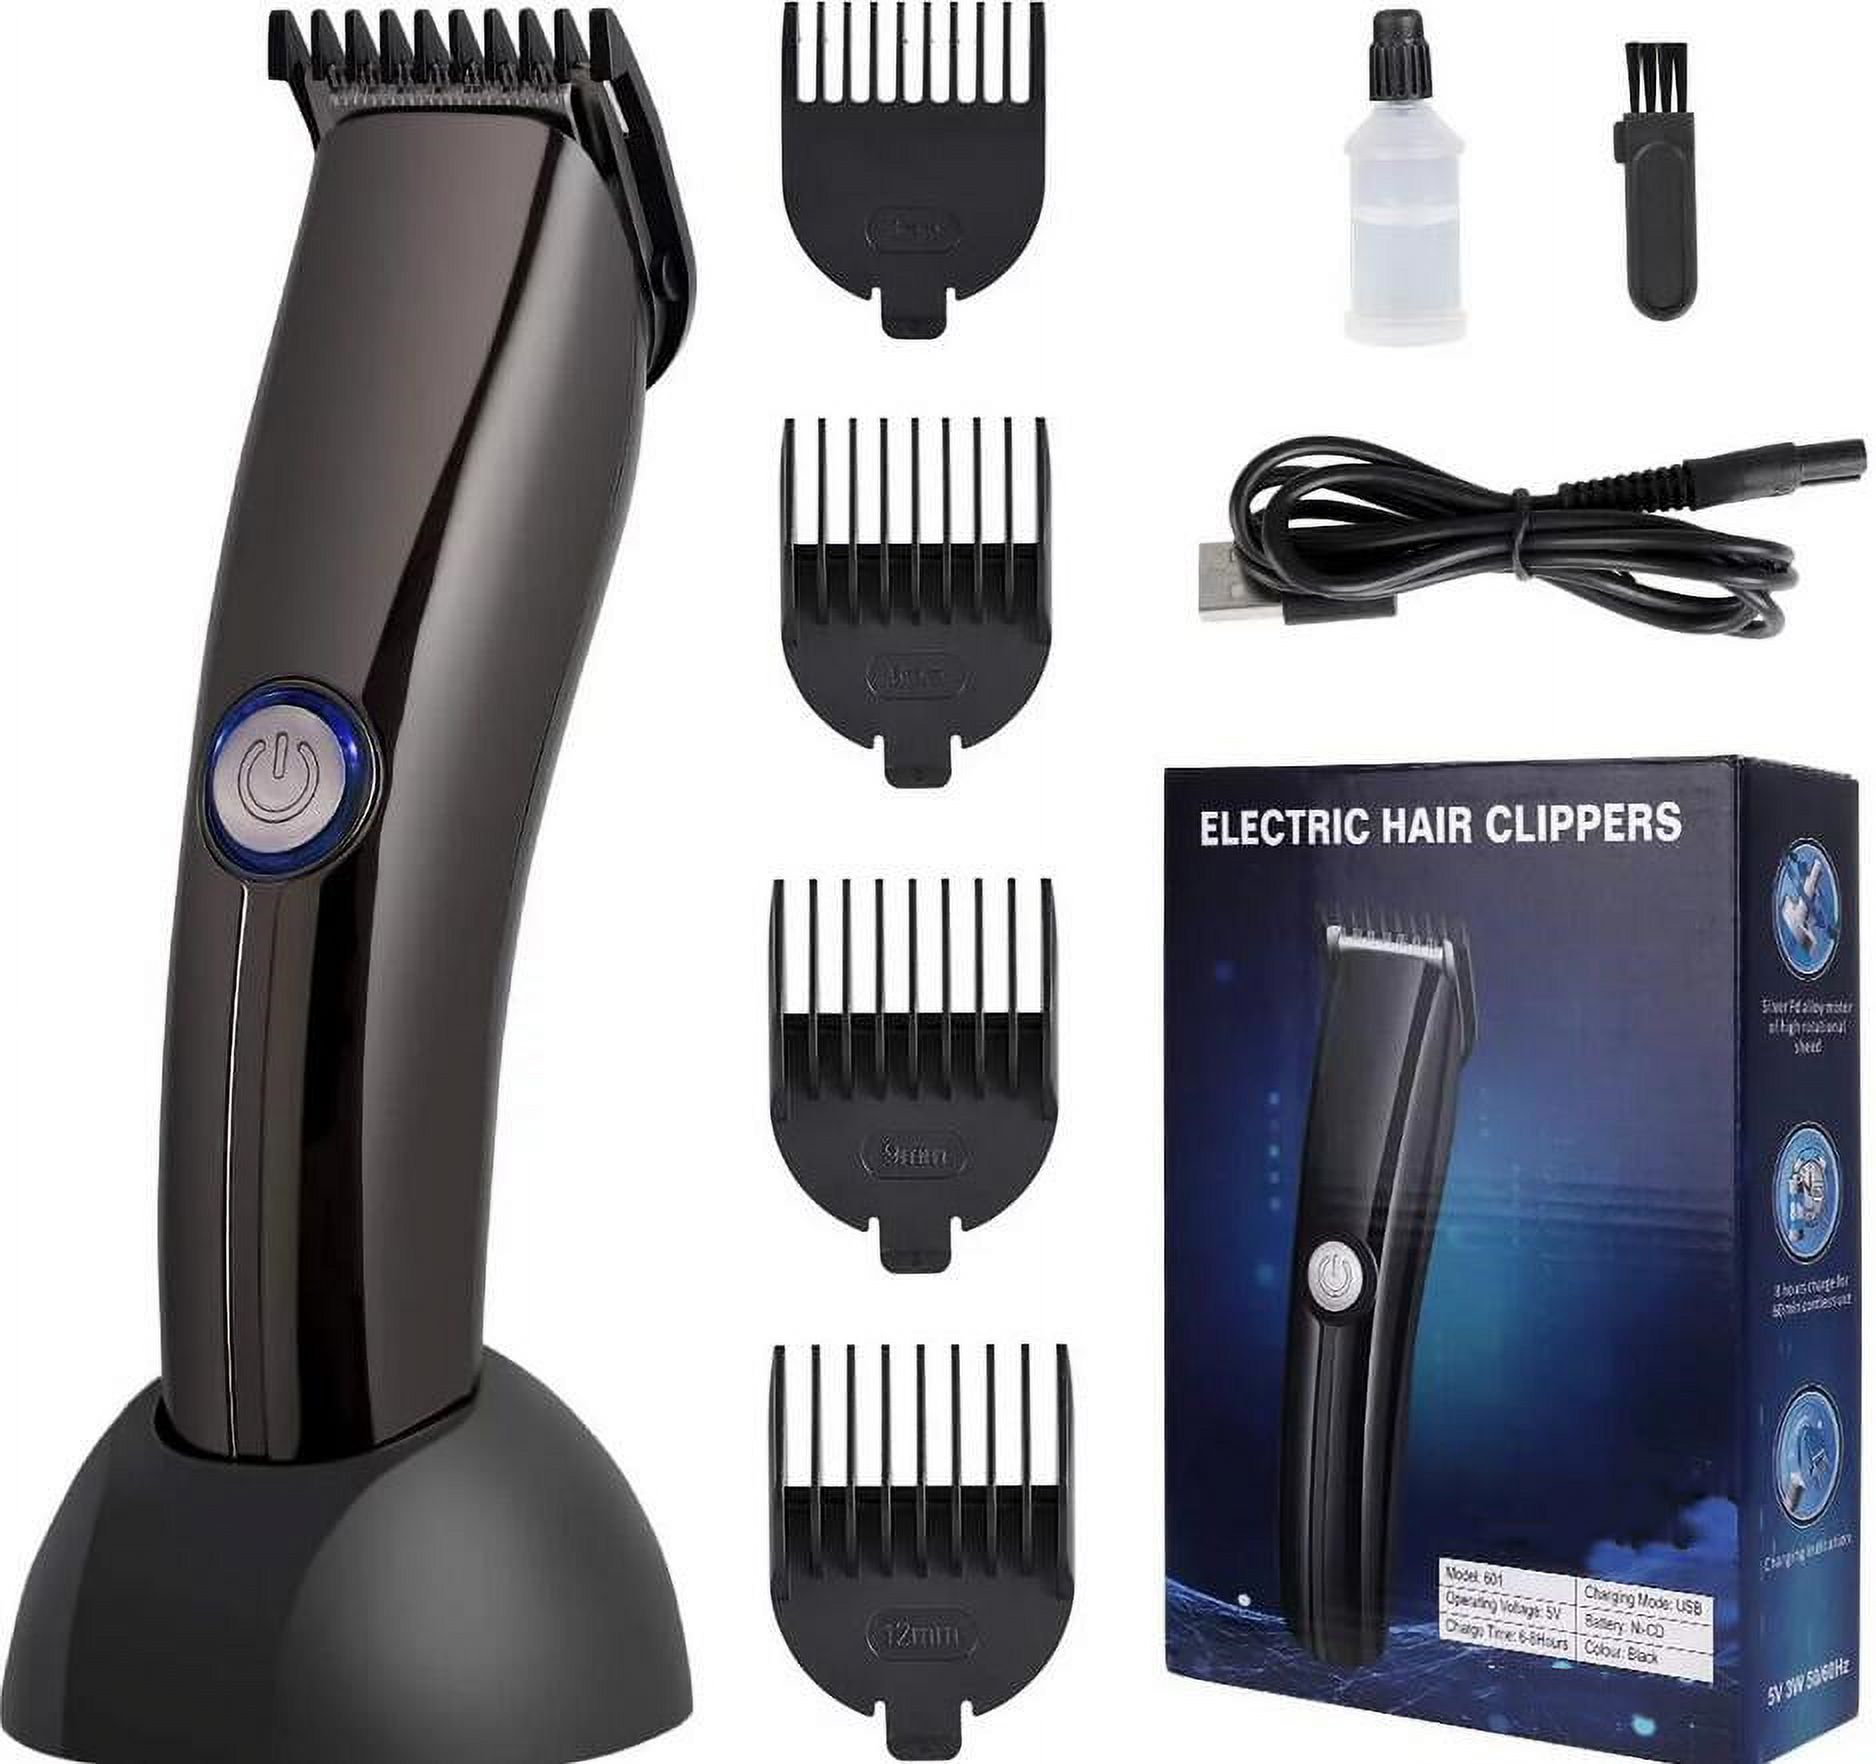 Wahl Clipper Lithium-Ion Cordless Haircutting Kit Rechargeable Grooming and Trimming Kit with 12 Guide Combs for Haircutting and Large Beard Trimmin